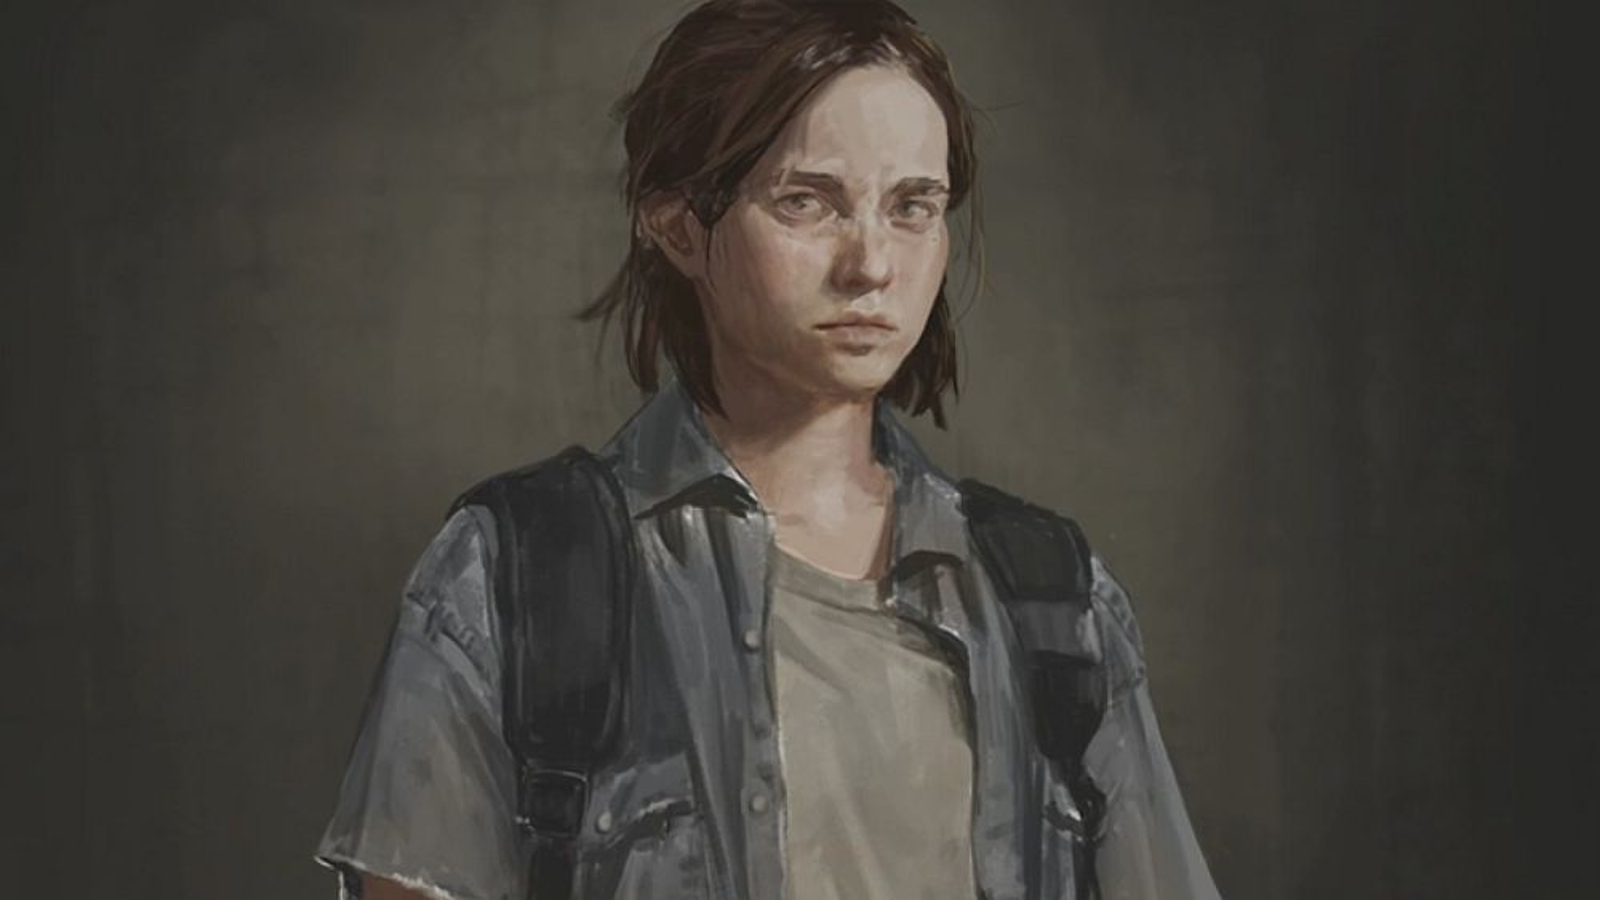 Ellie Will Have An NPC Companion In The Last Of Us Part 2 - GameSpot